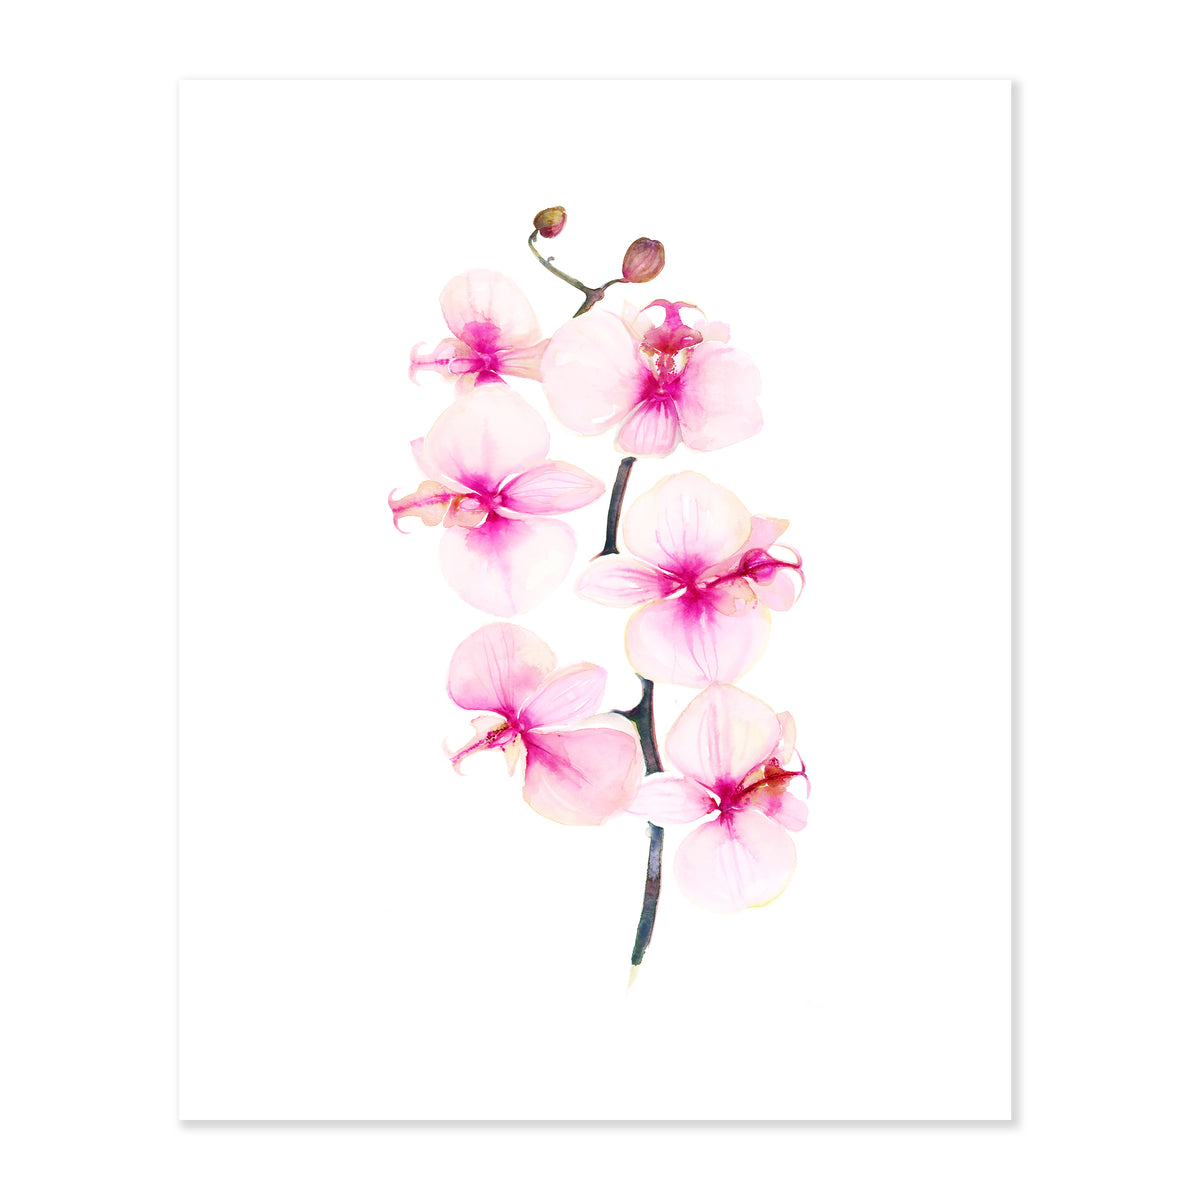 A fine art print illustrating a blooming pink orchid painted with watercolor on a soft white background